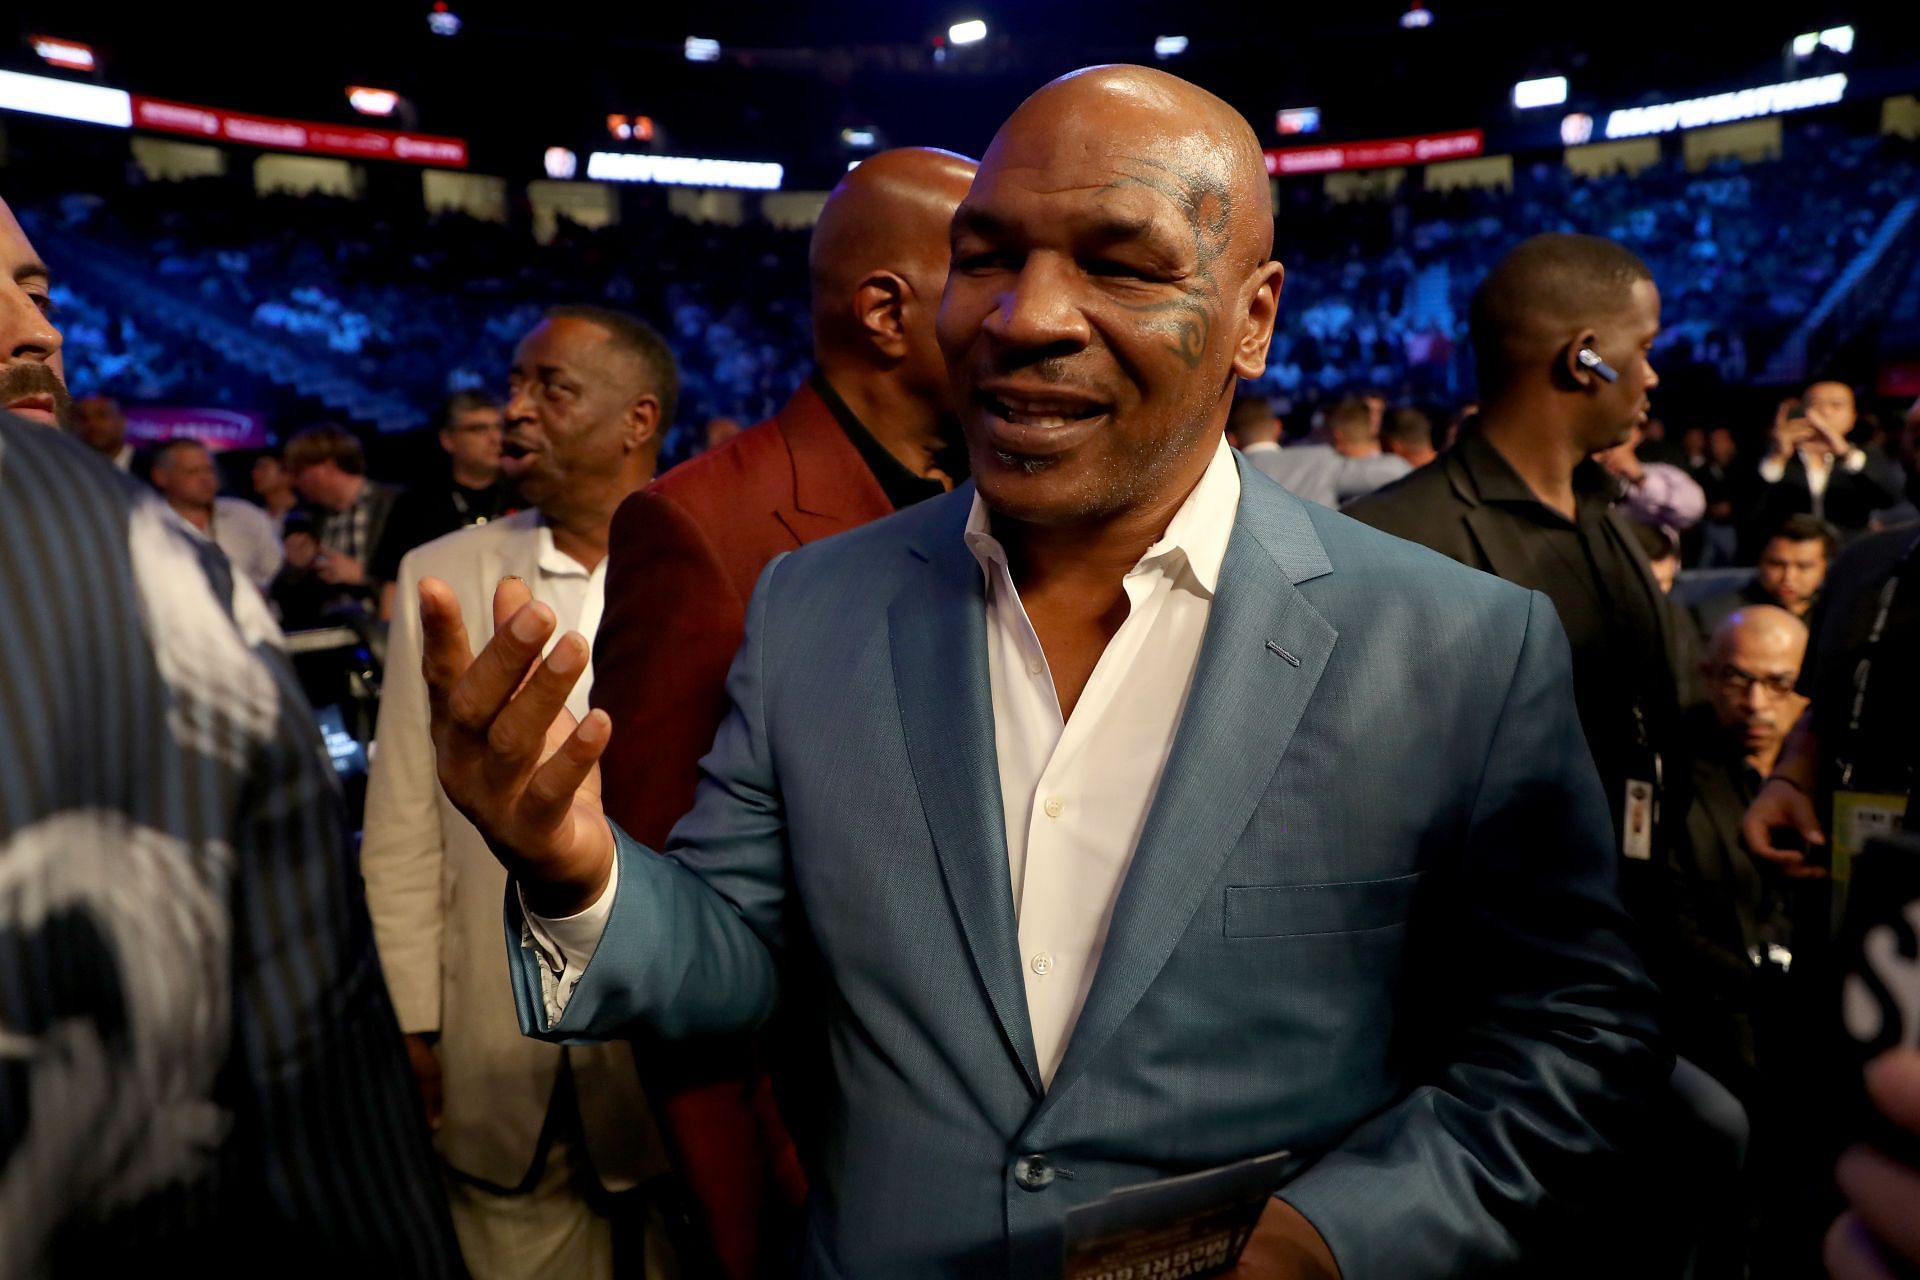 Hall of Famer Mike Tyson at a boxing event.